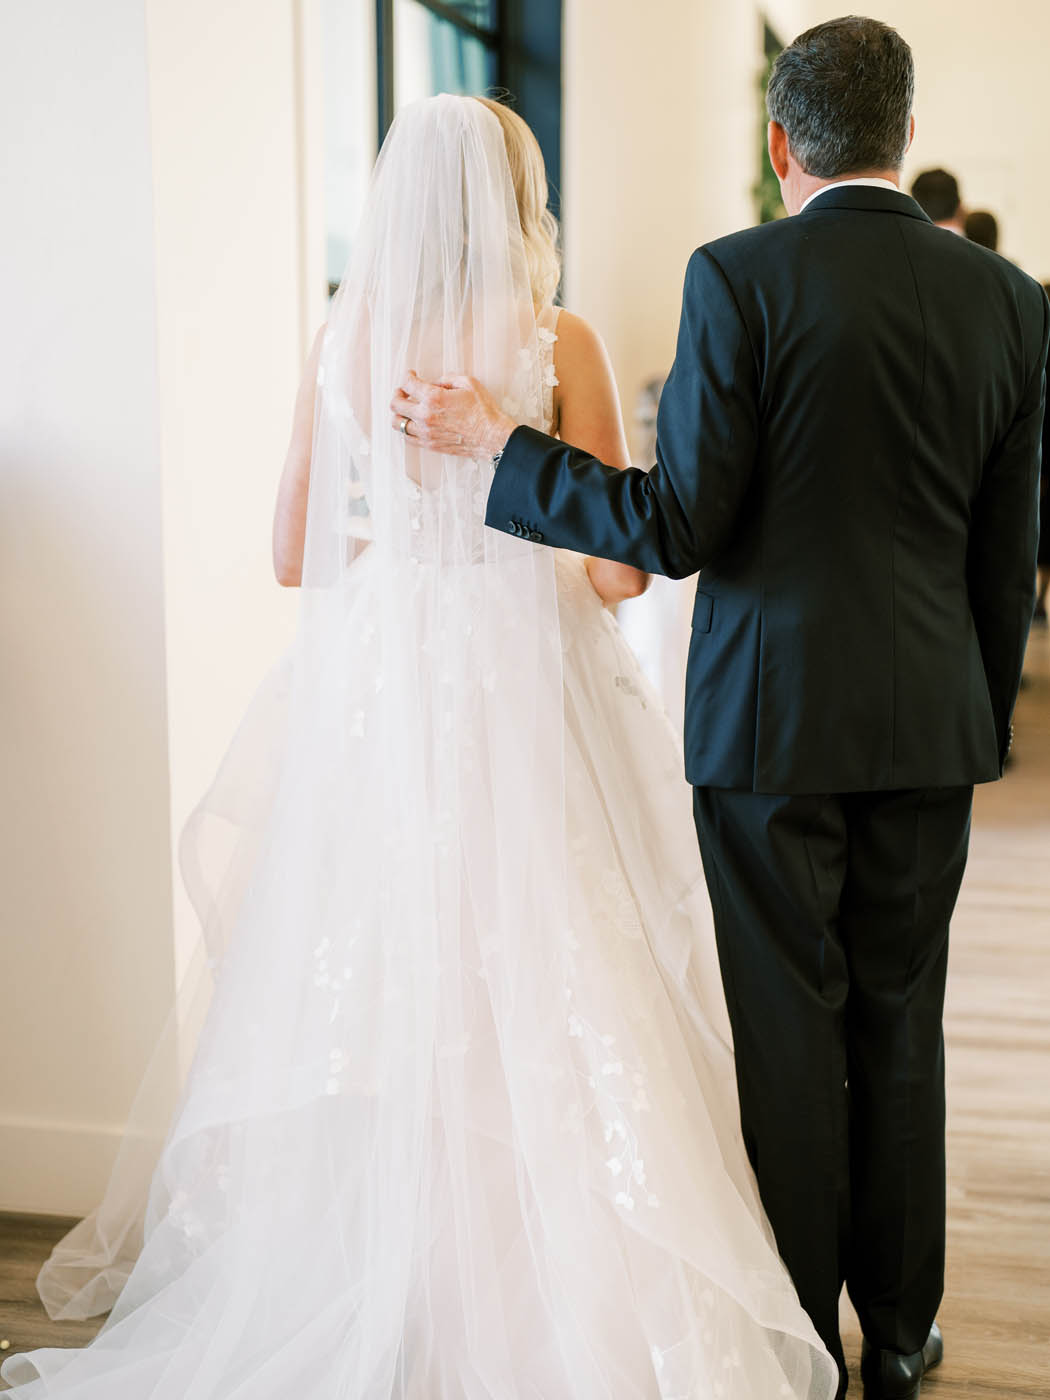 the bride and her father share a tender moment before she walks down the aisle